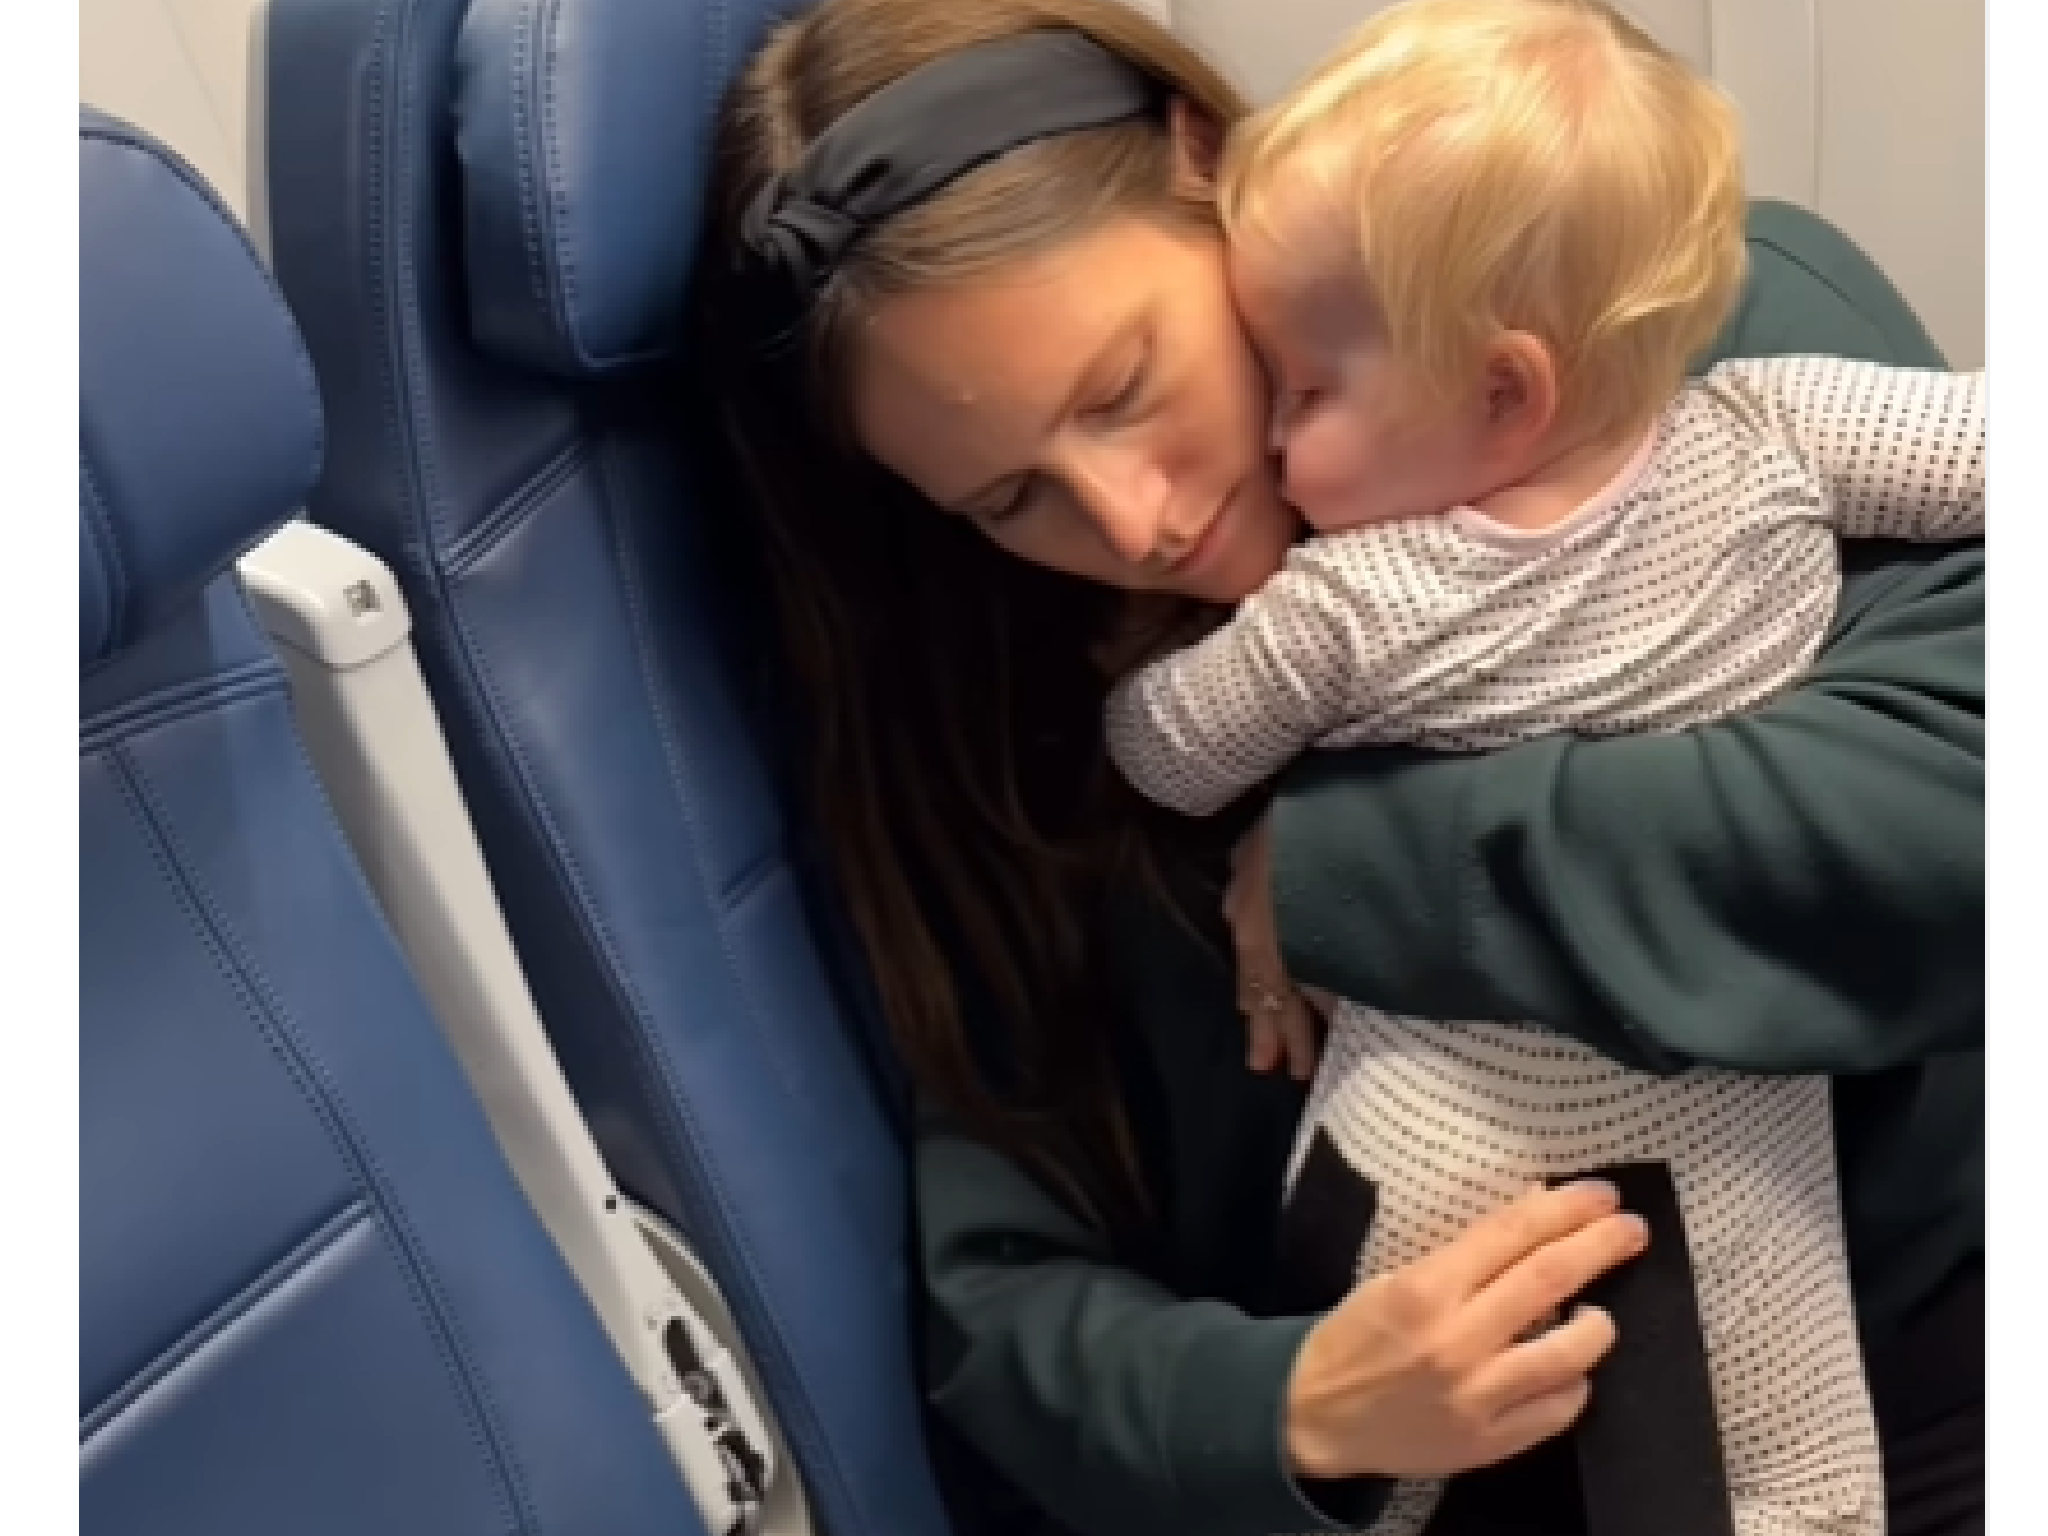 The video showing how to tape a baby up for a flight was liked almost a million times on TikTok